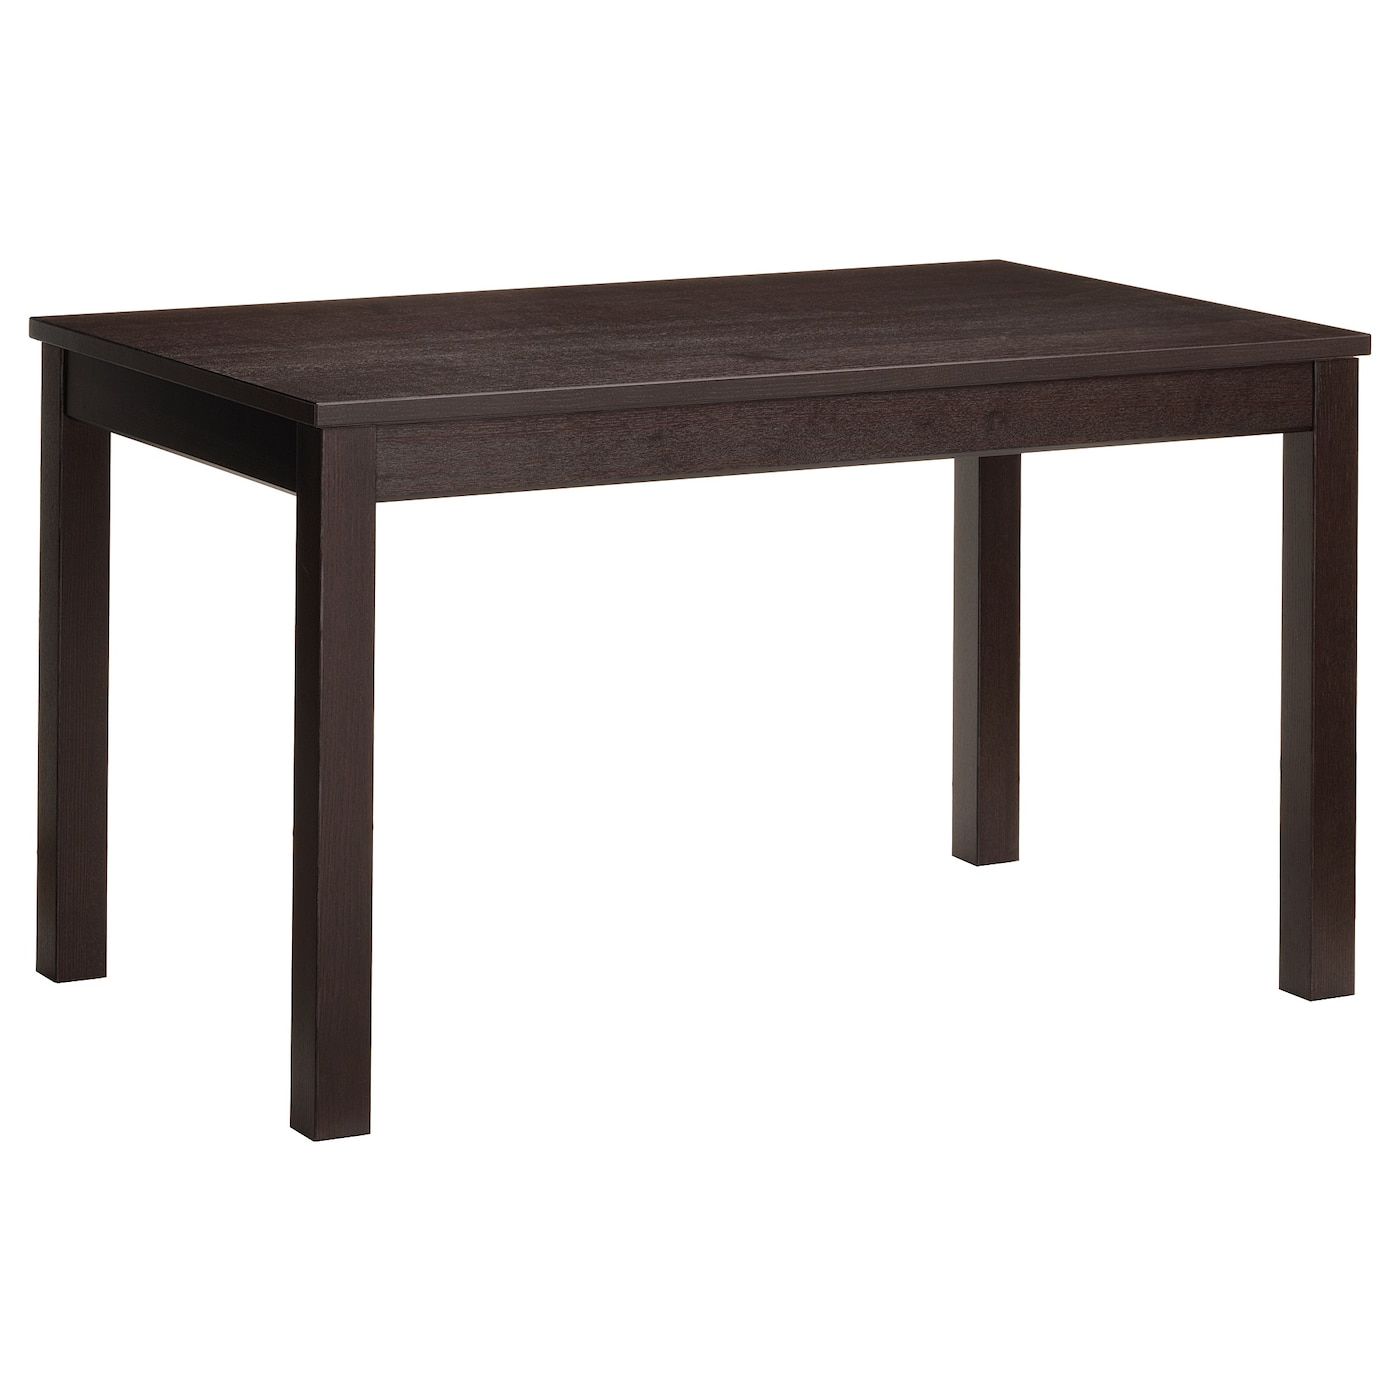 Most Popular Small Dining Tables With Rustic Pine Ash Brown Finish Inside Extendable Table Laneberg Brown (View 7 of 30)